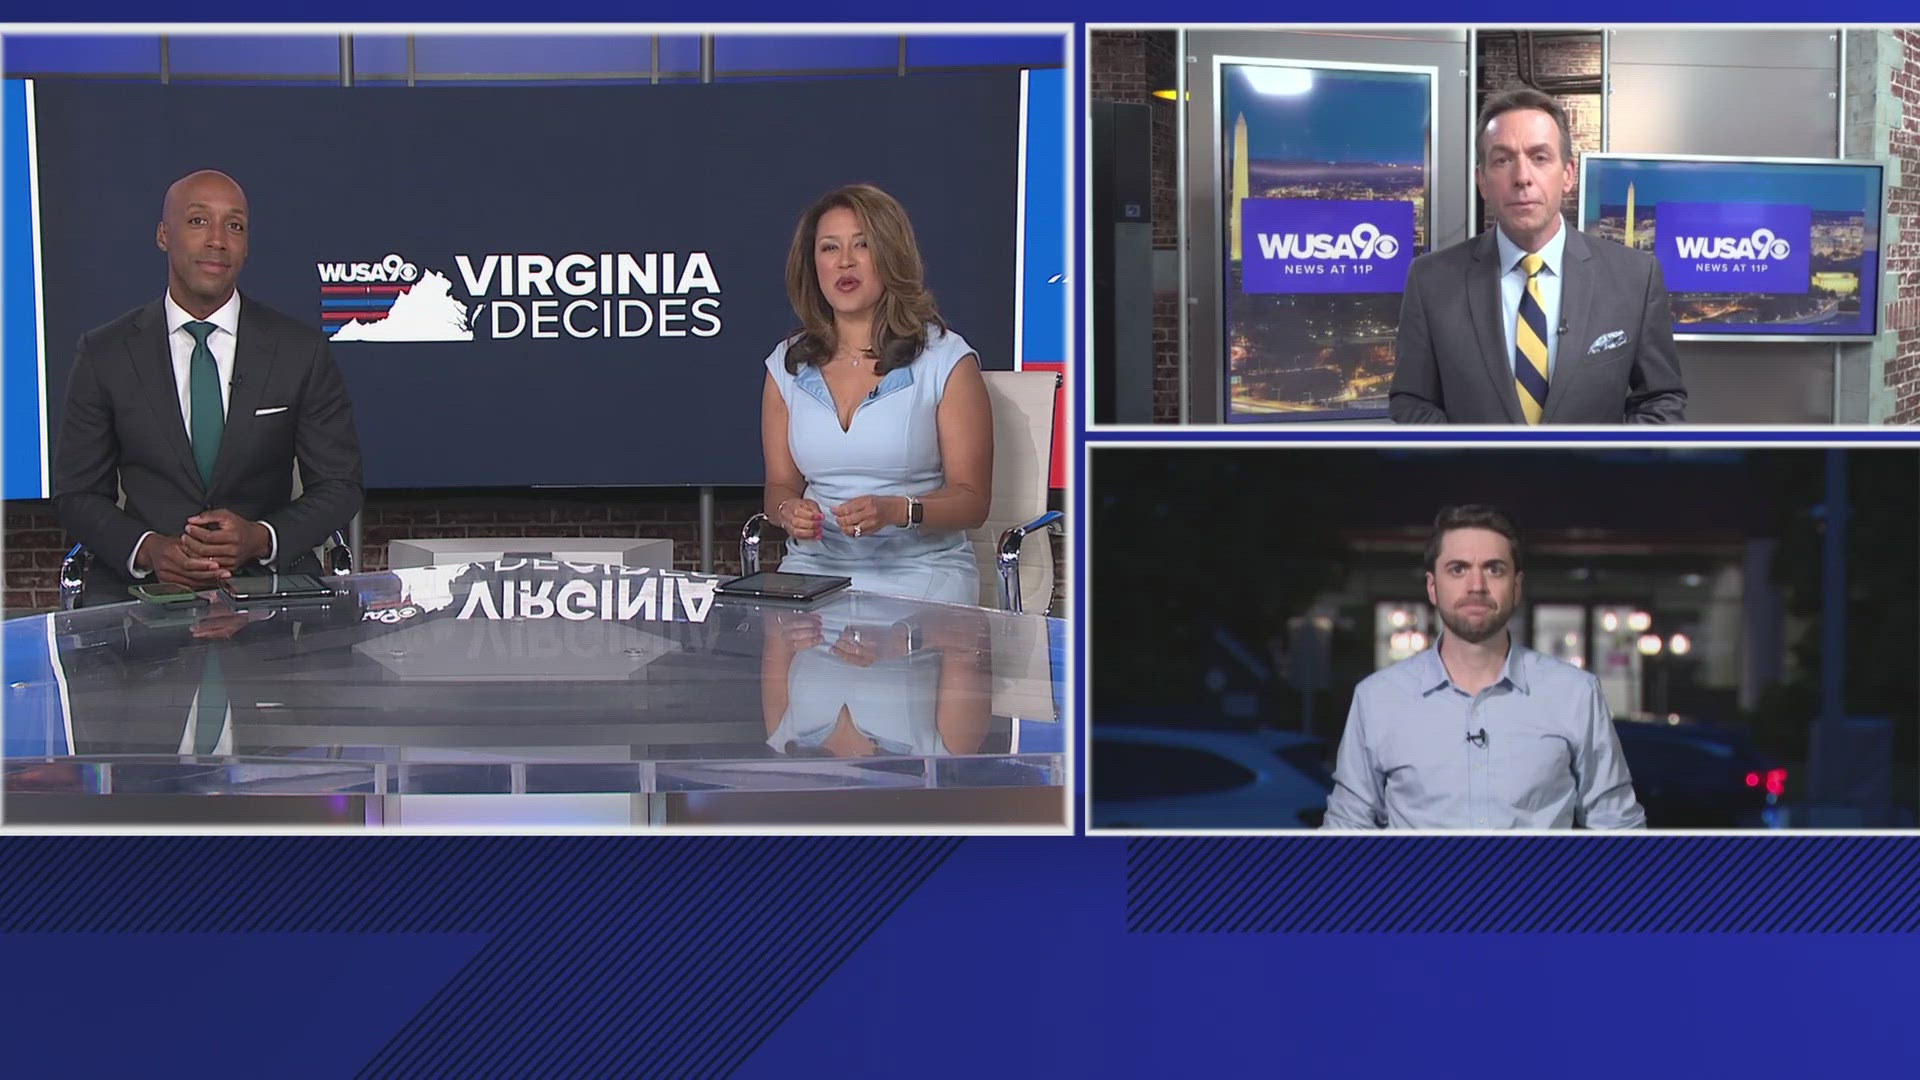 Virginia voters headed to the polls Tuesday for the second time in the primary election season, after casting presidential candidate votes back in March.